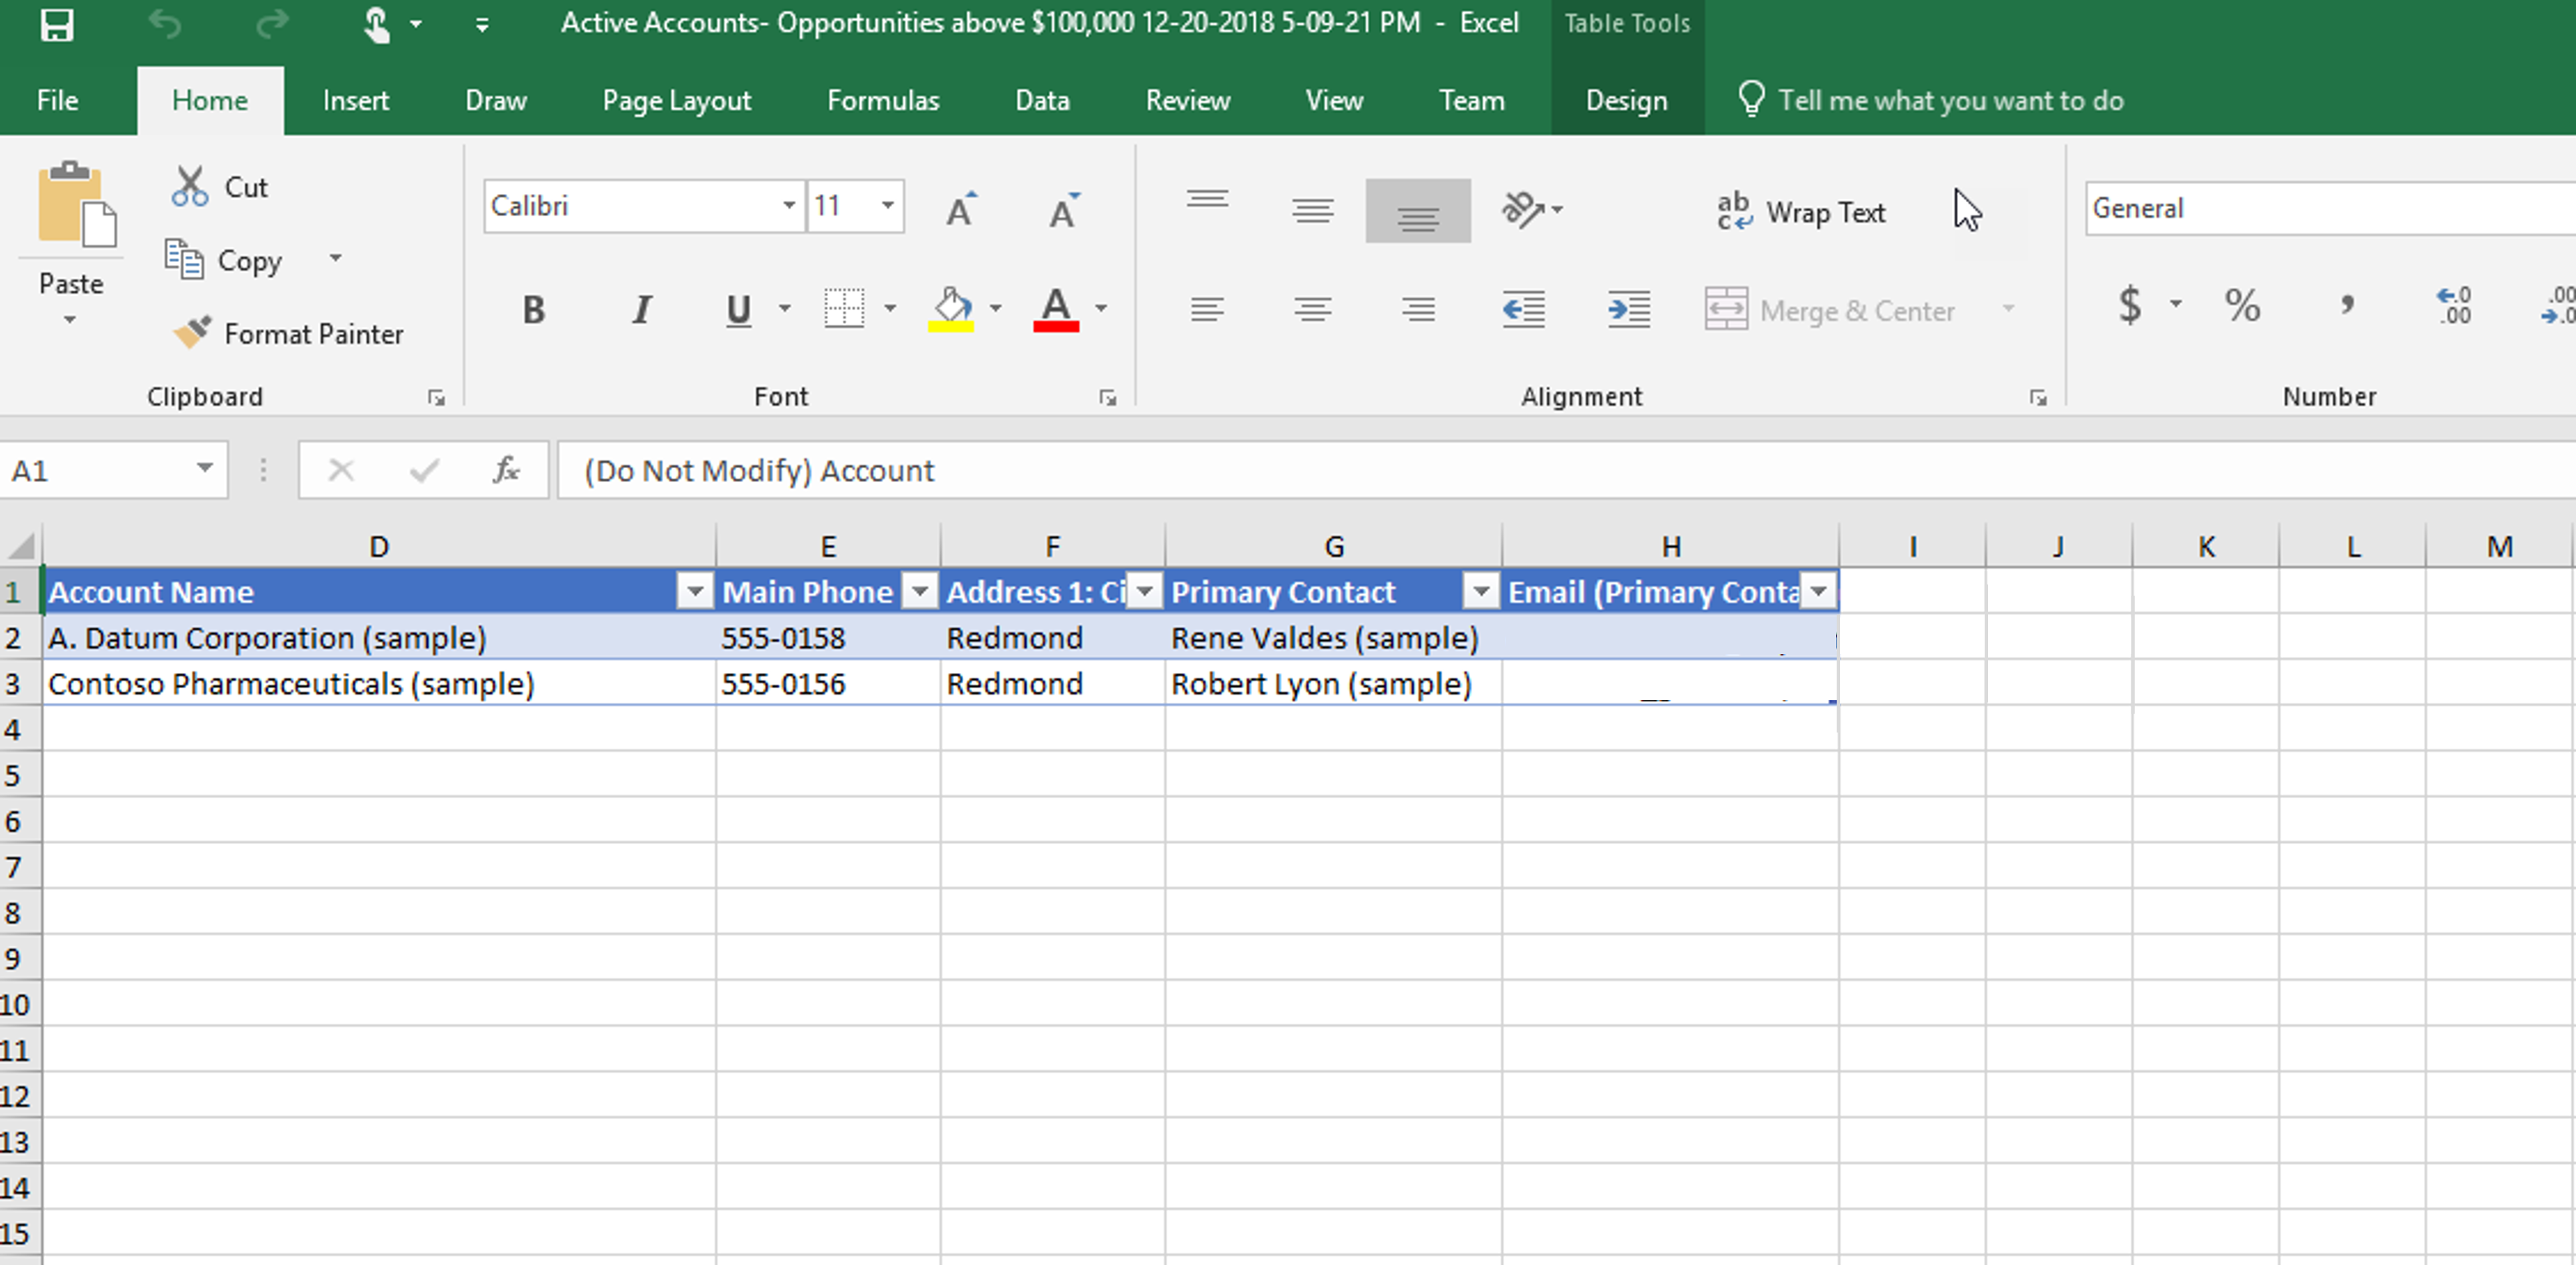 Dynamics 365 data exported to Excel from Active Accounts: Opportunities above $100,000.